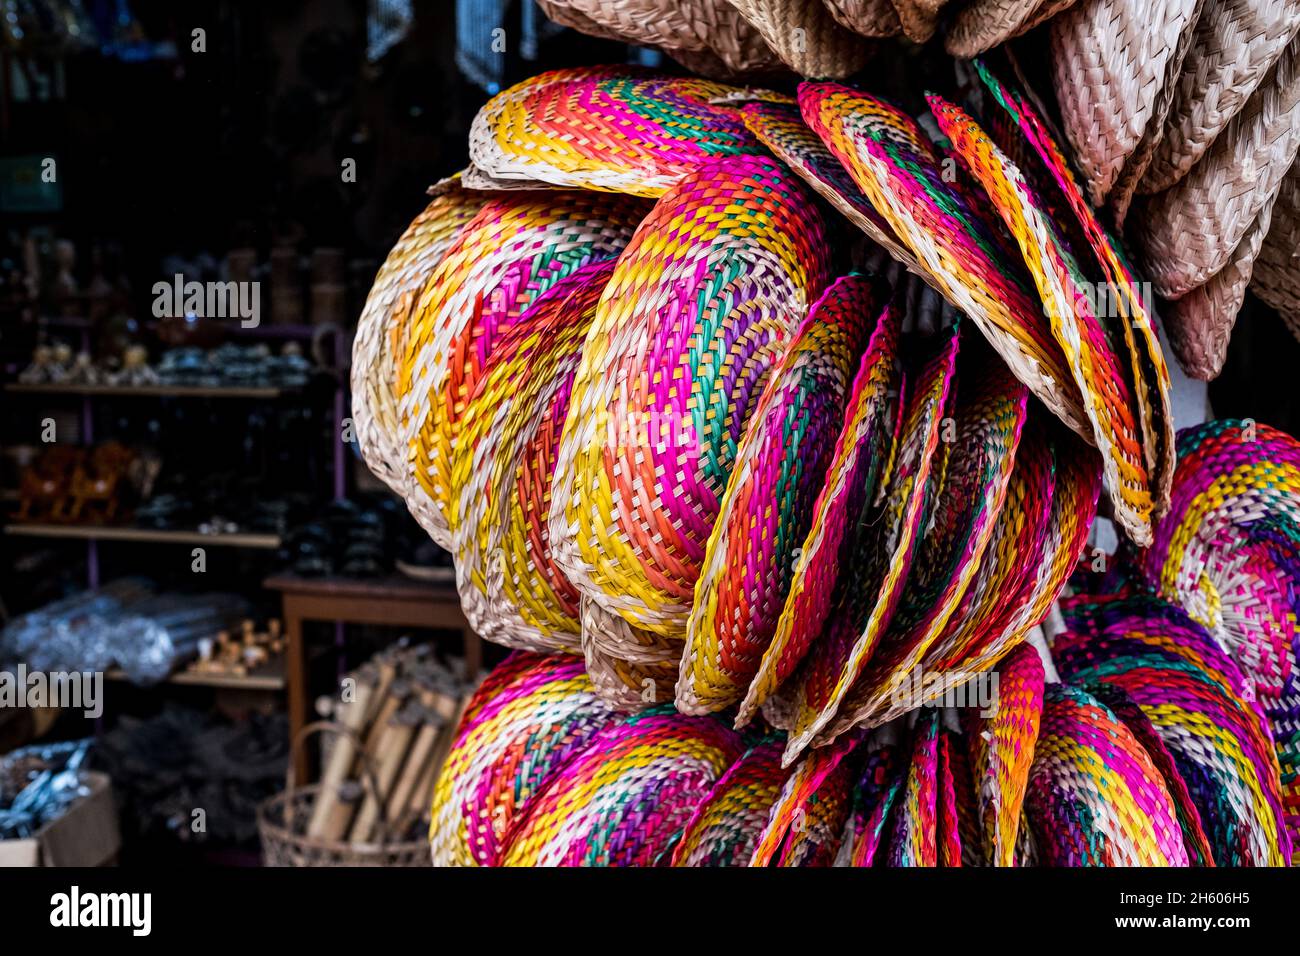 July 2017. Colorful local rattan products. Puerto Princesa, Palawan, Philippines. Stock Photo